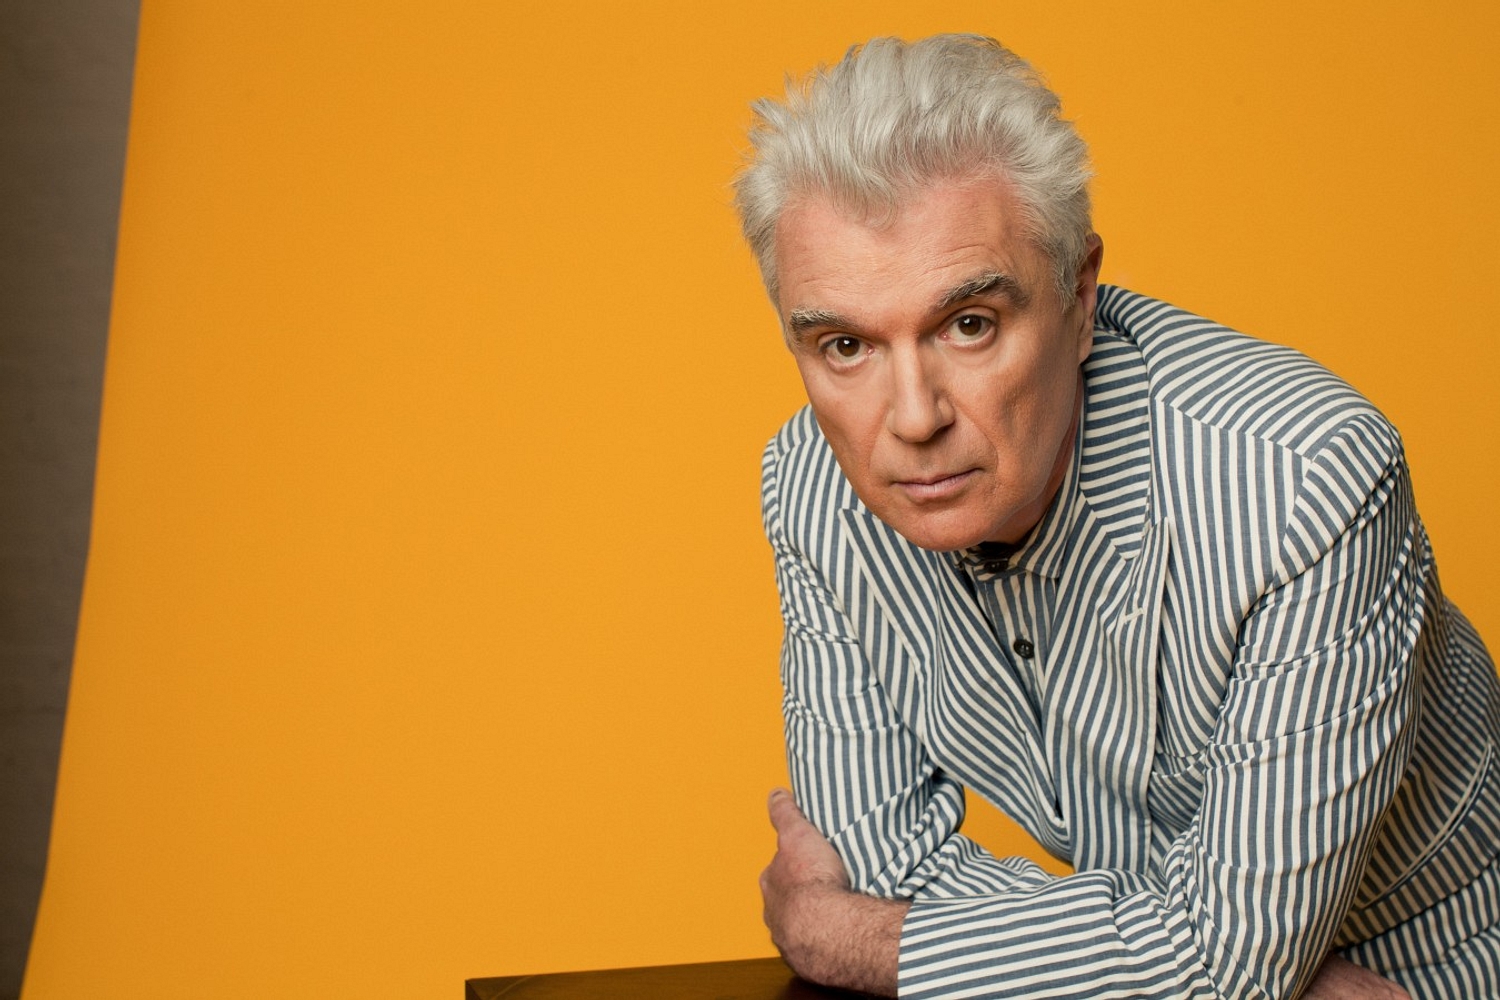 David Byrne to host color guard show, featuring St. Vincent, Dev Hynes, Kelis, How to Dress Well, more